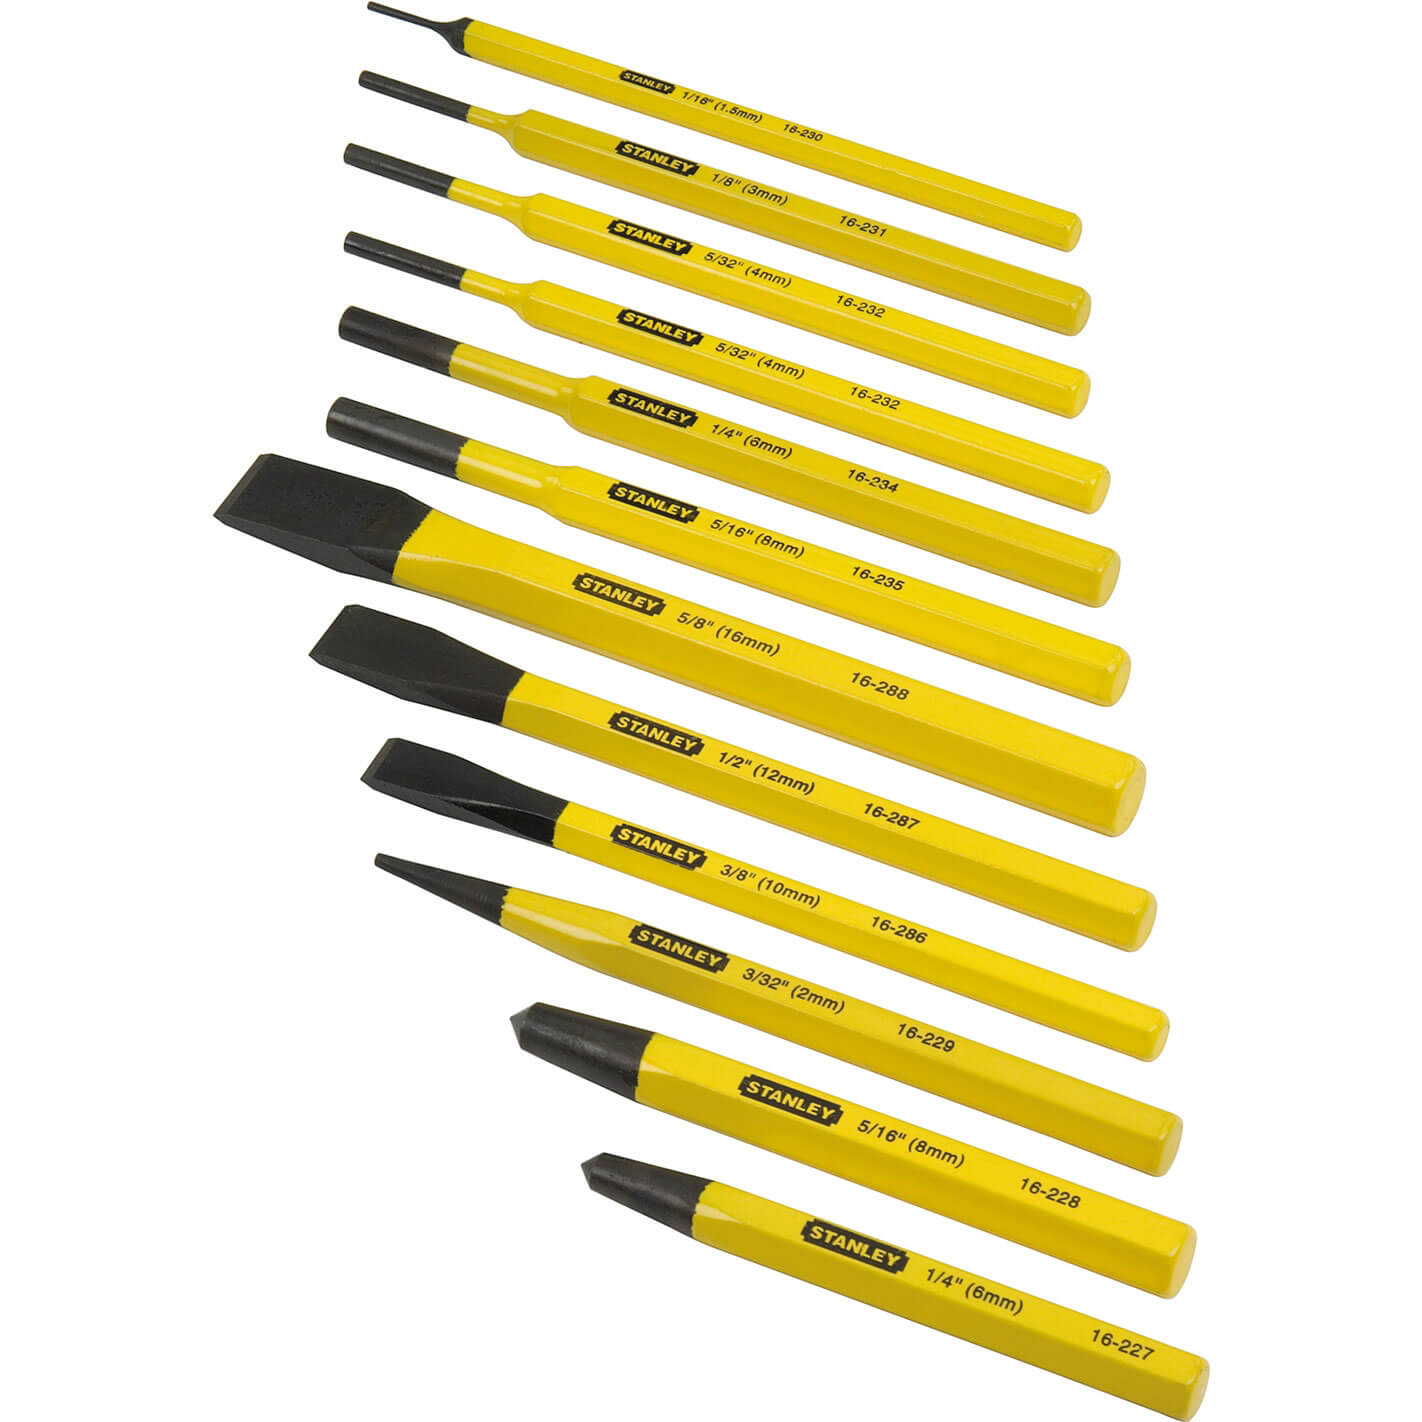 Stanley 12 Piece Punch and Chisel Set